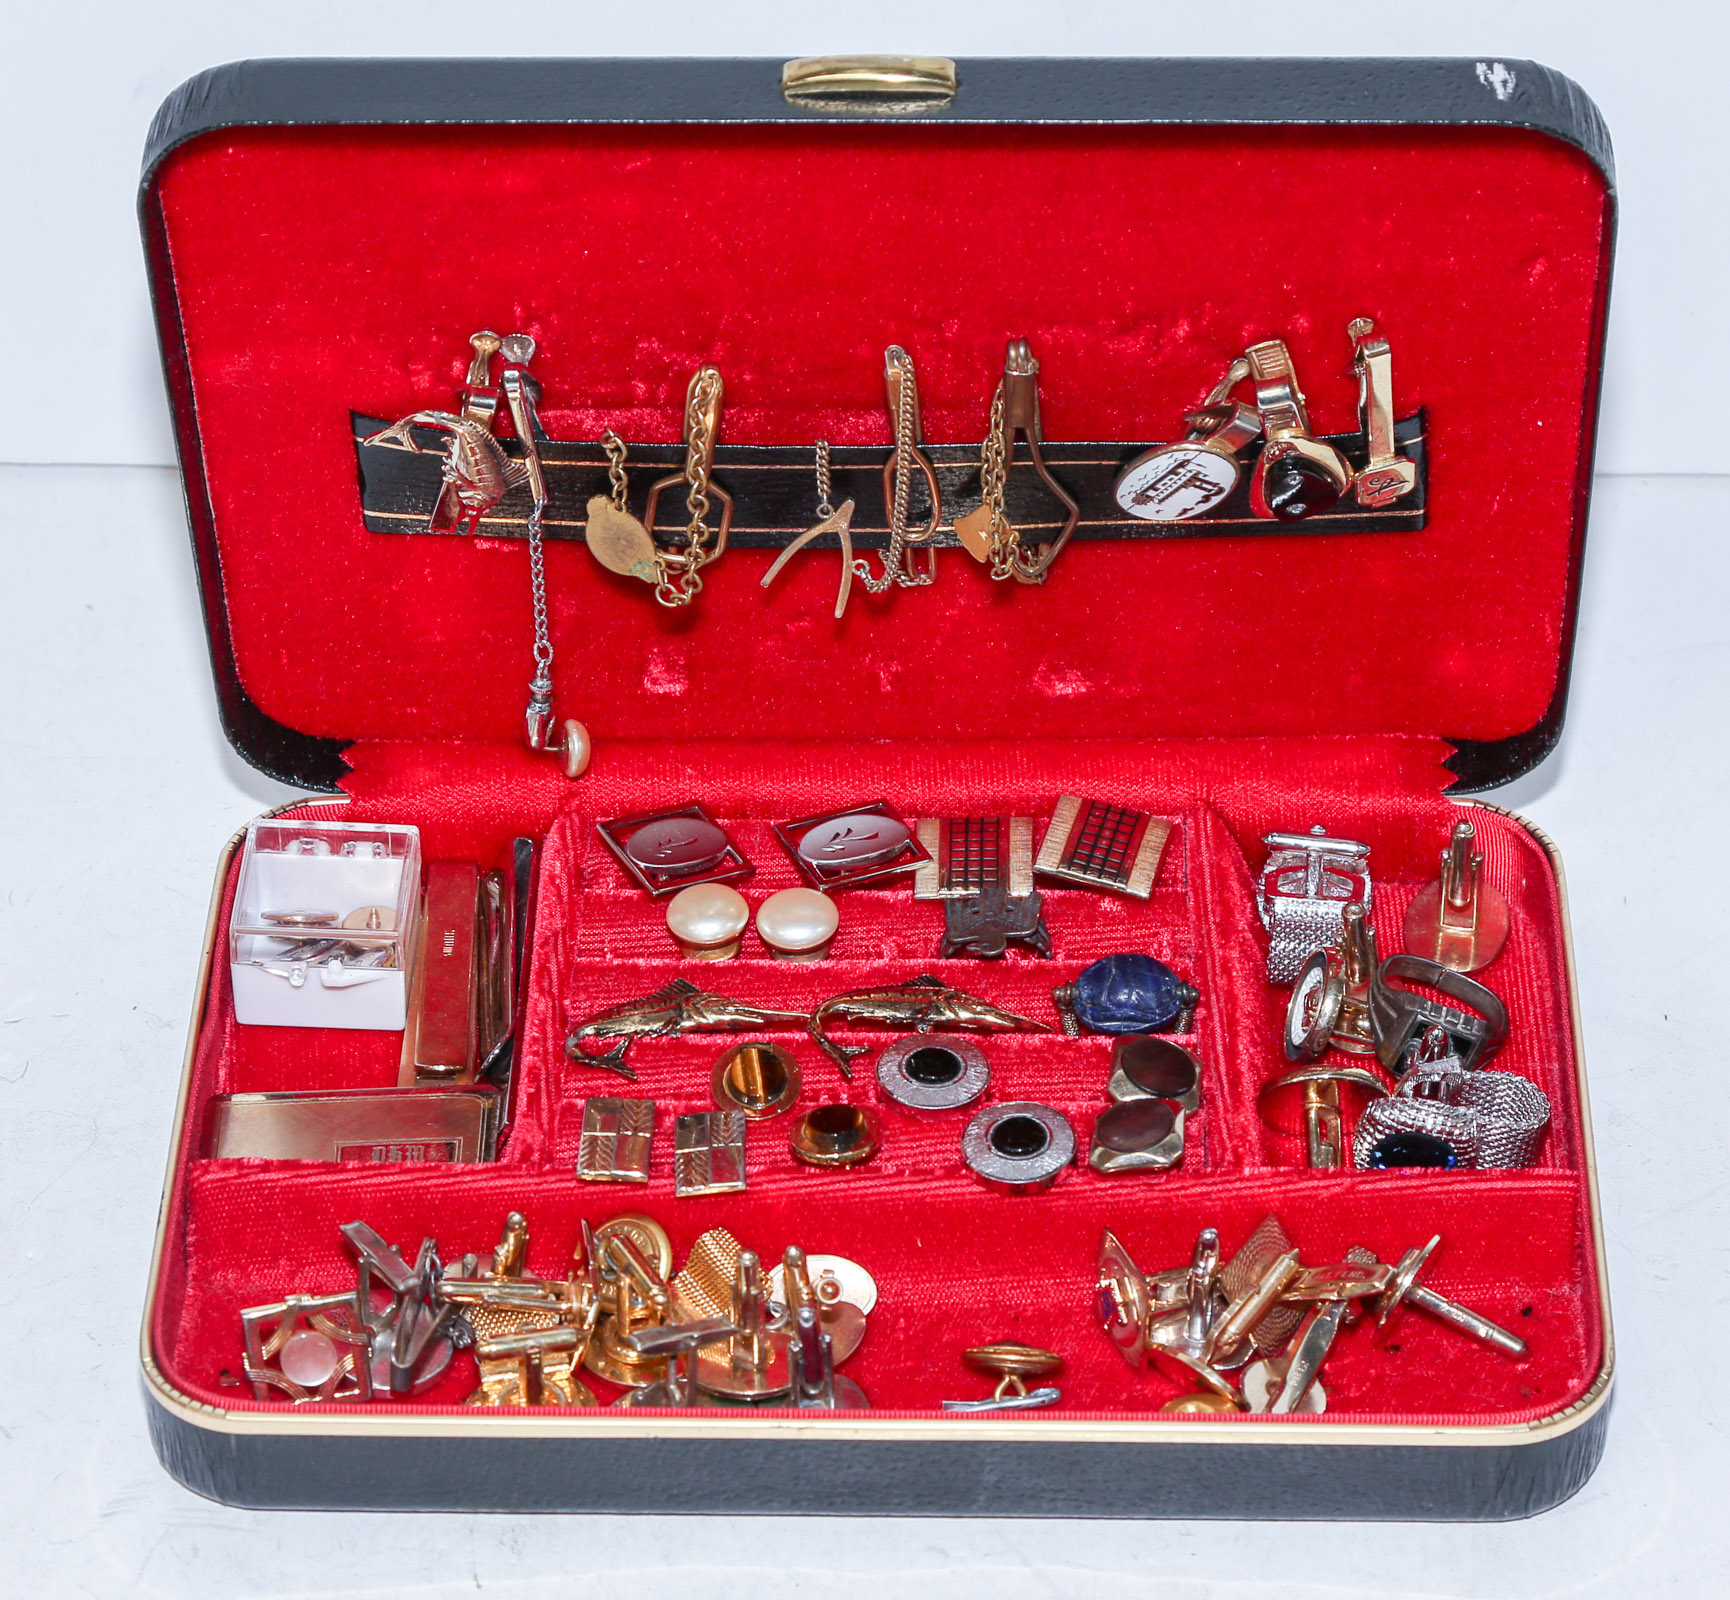 A JEWELRY BOX FILLED WITH CUFFLINKS